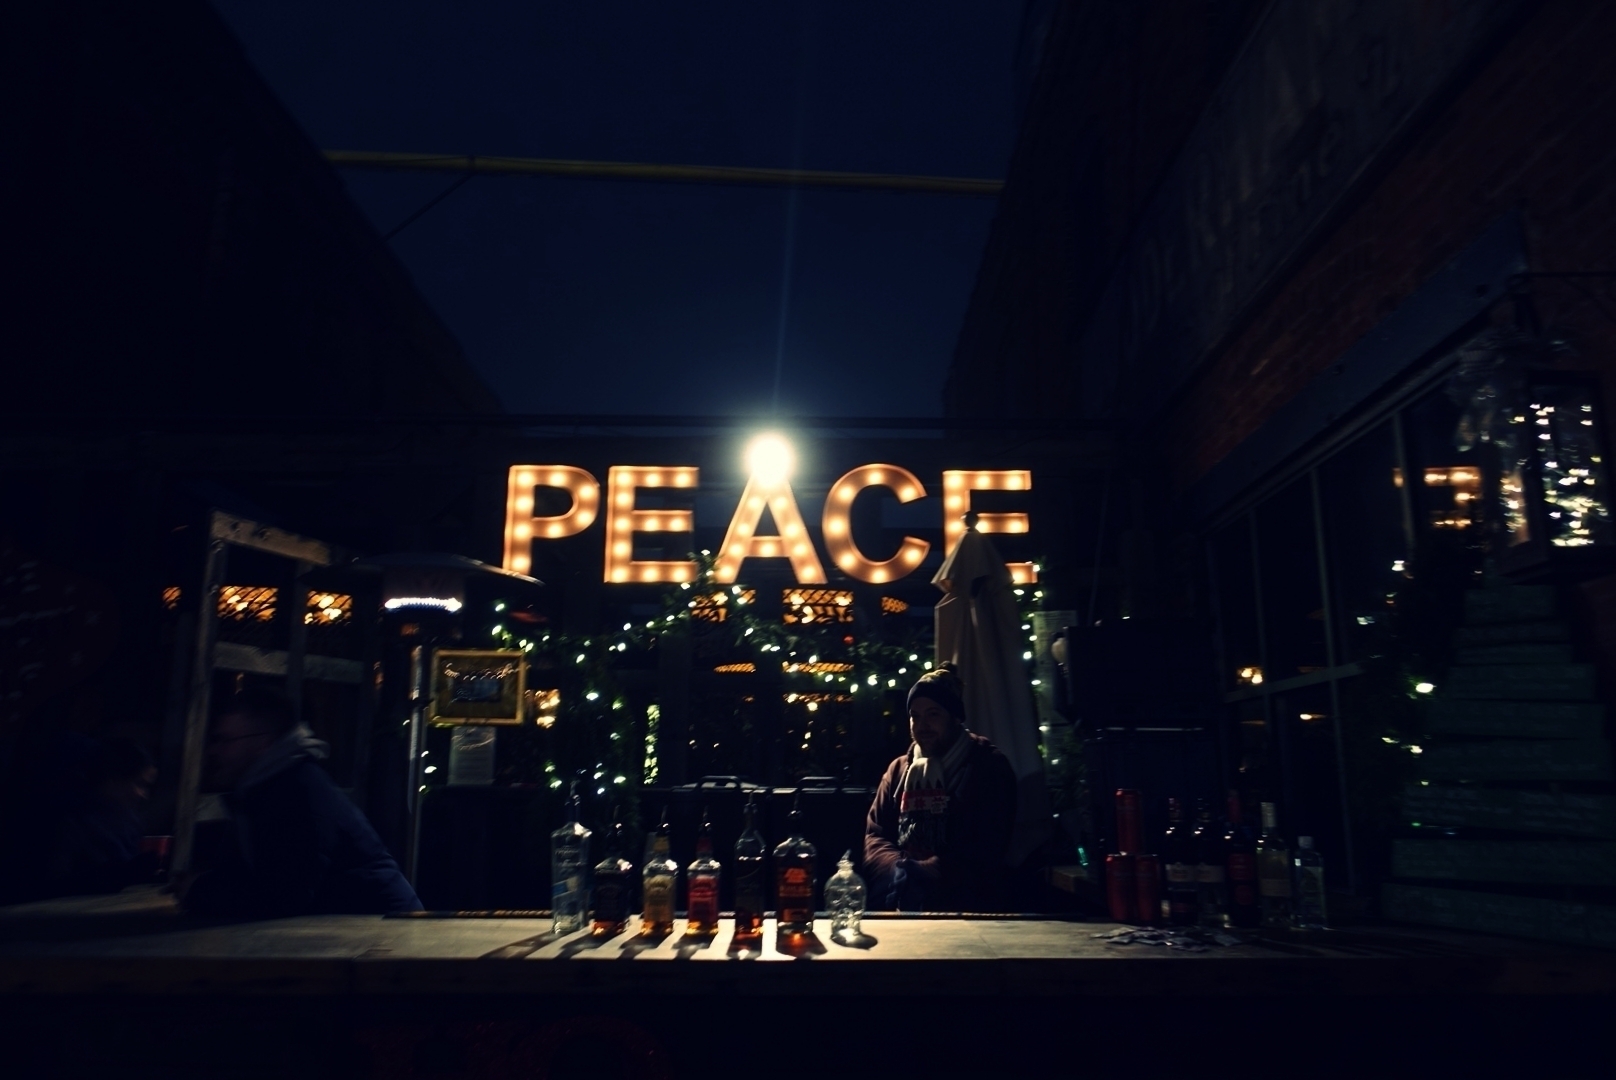 The letters P E A C E all lit up in a Christmas market stall